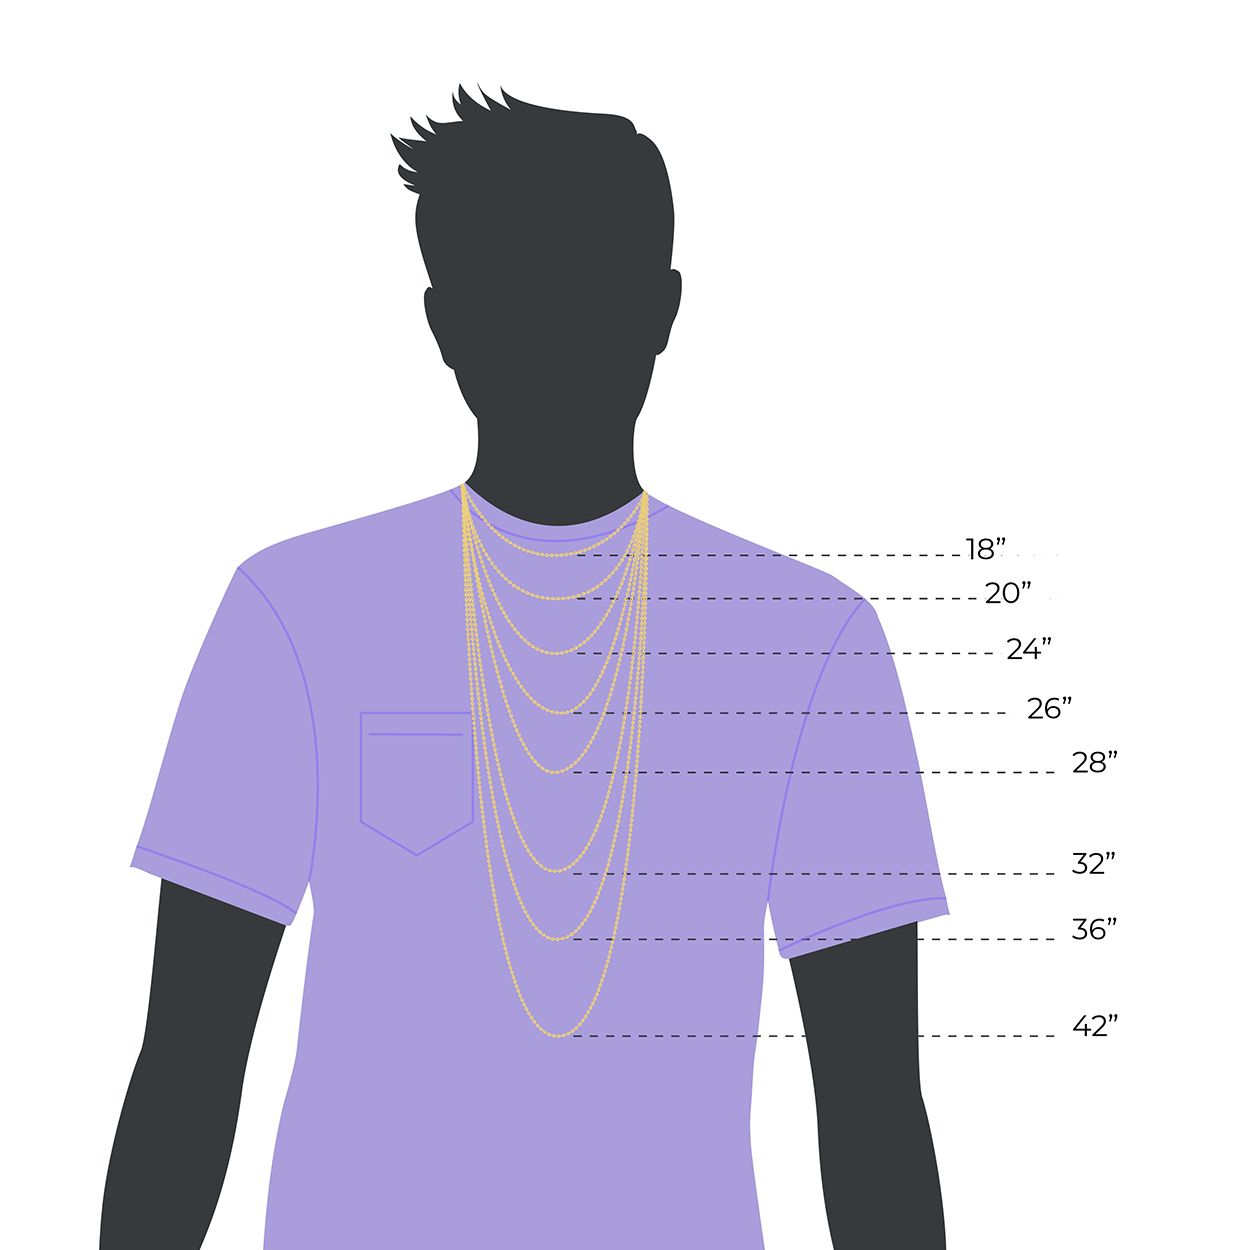 Necklace Length Guide with Male Silhouette